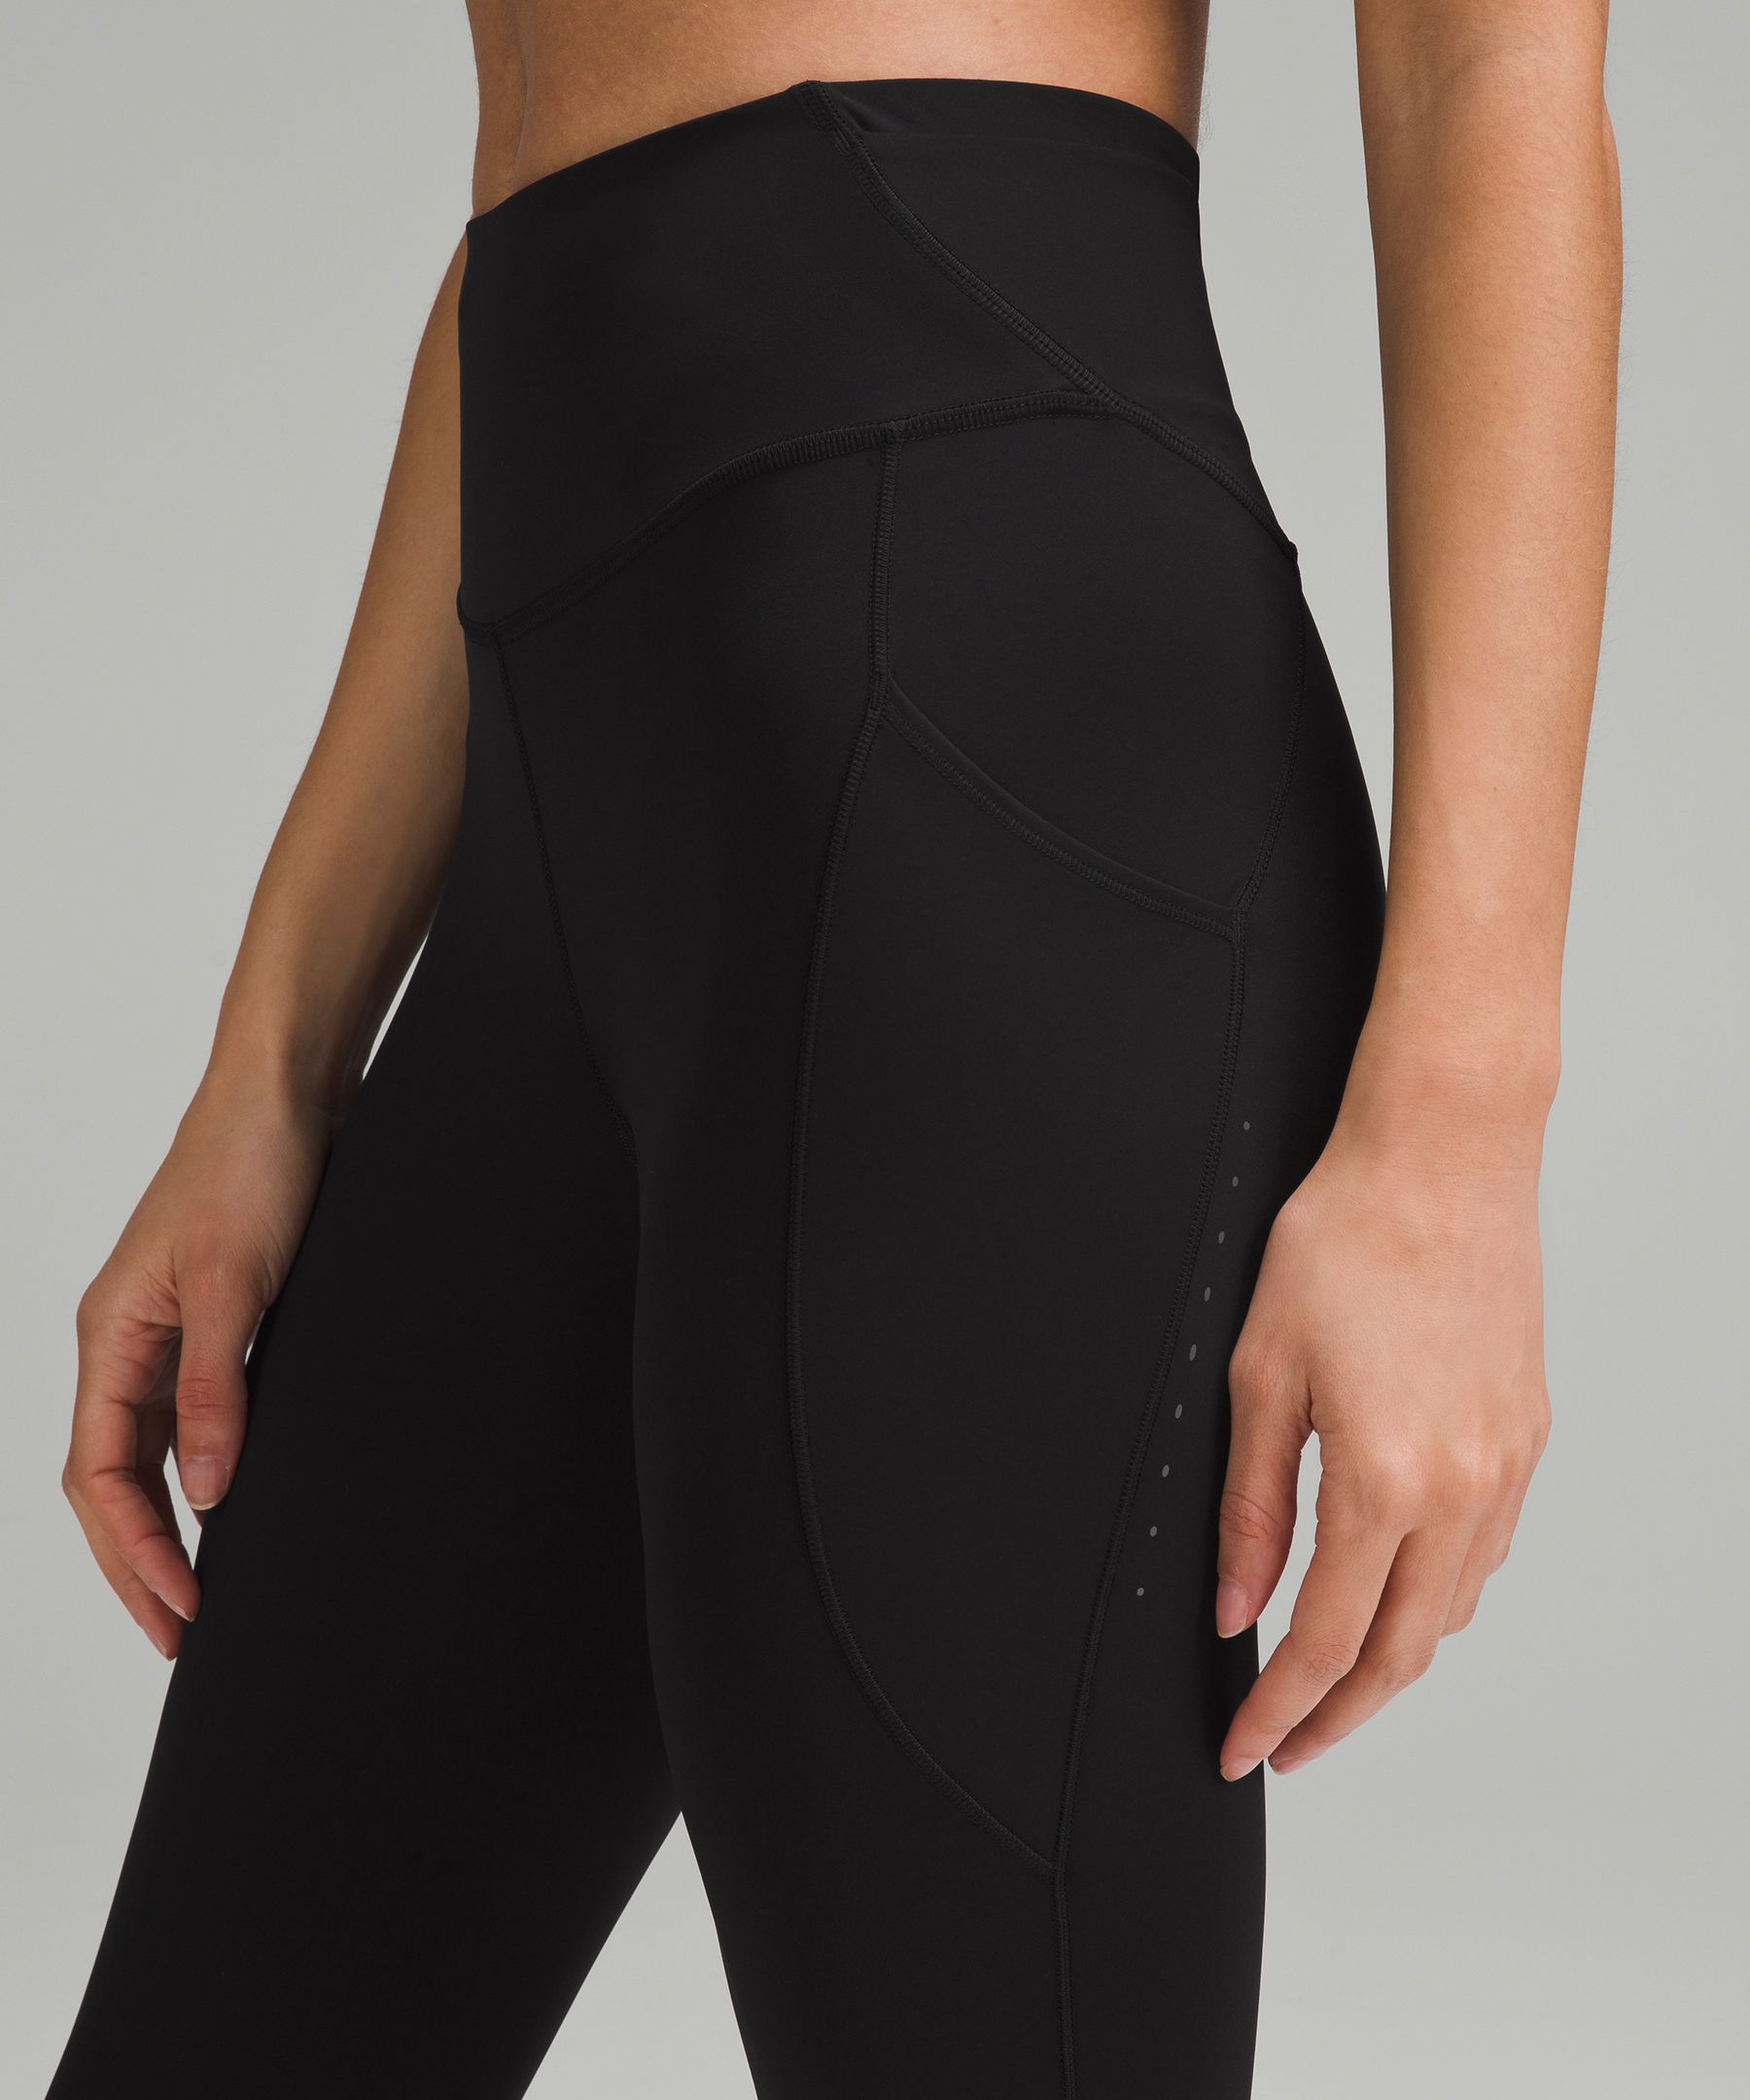 Lululemon Black Fast & Free 7/8 Tight II High Rise Side Pockets 4 W5BXQS  Nulux